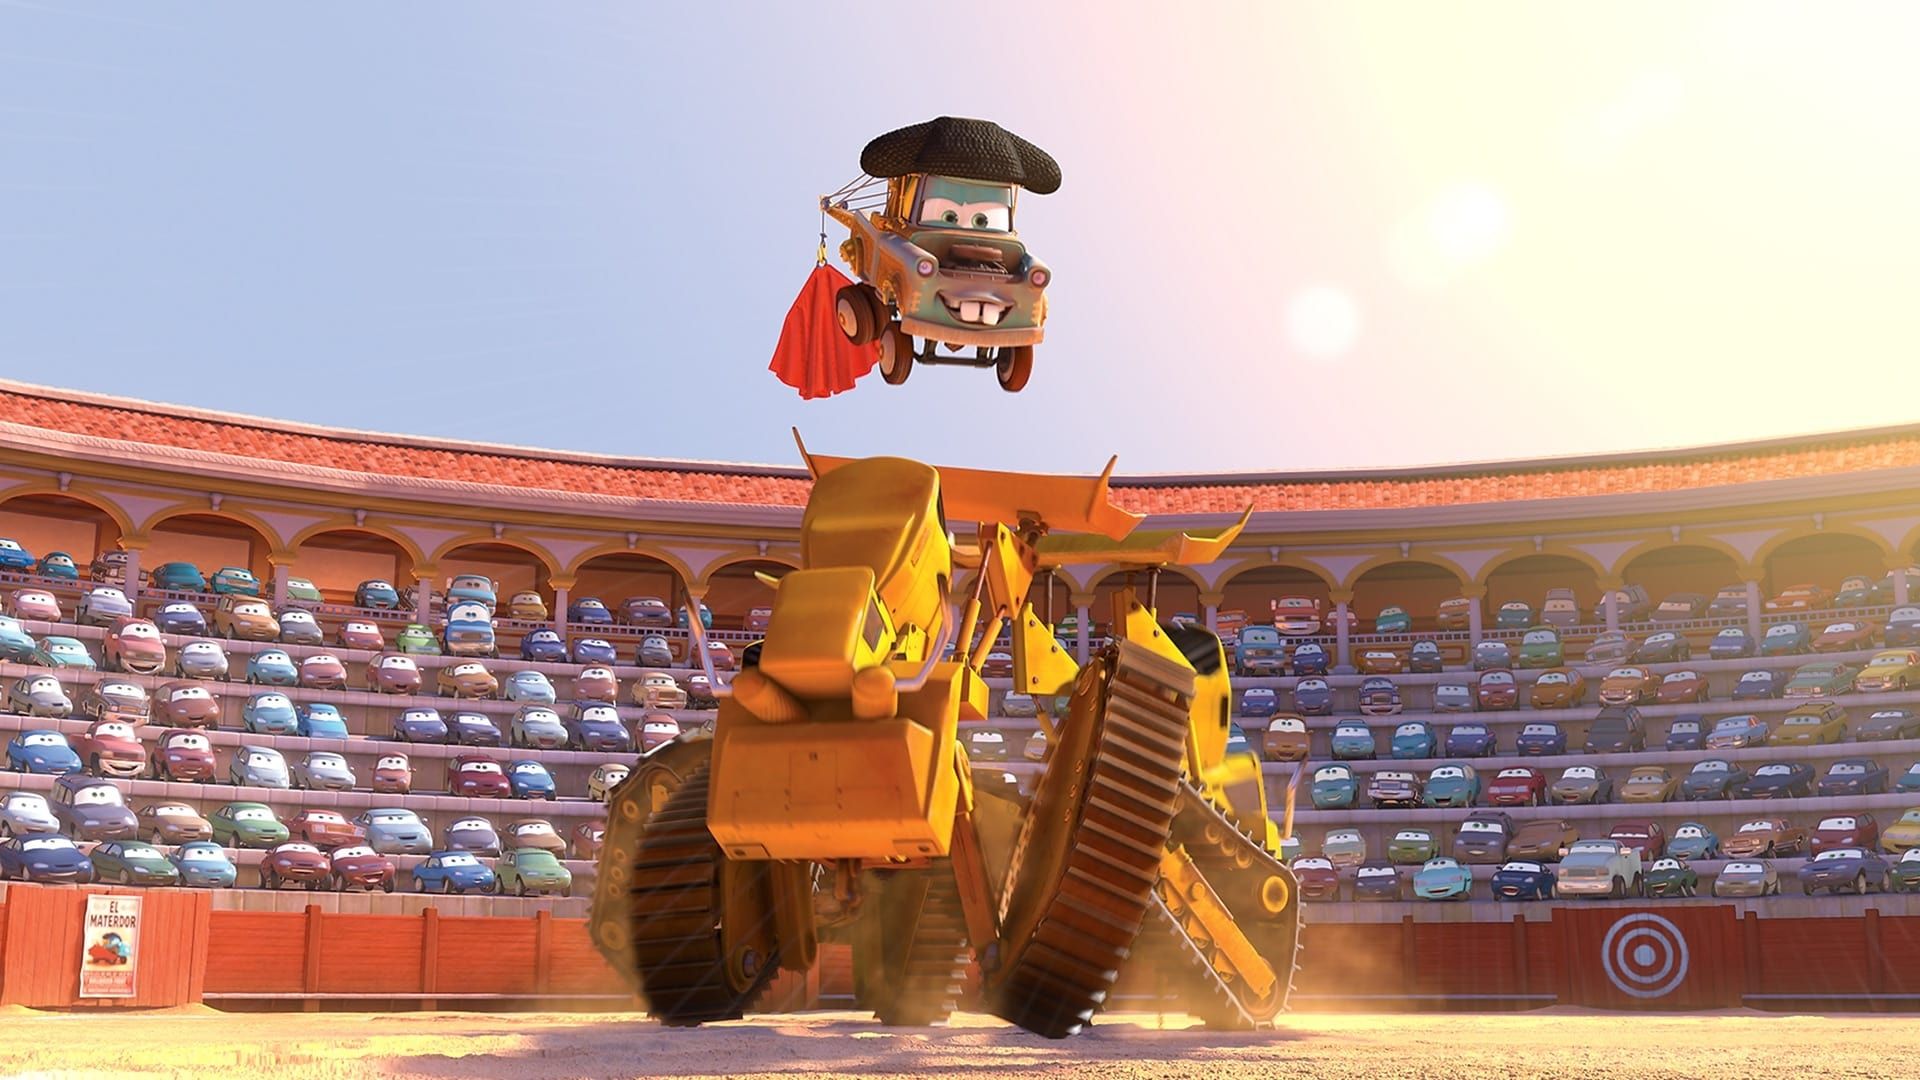 Mater's Tall Tales background